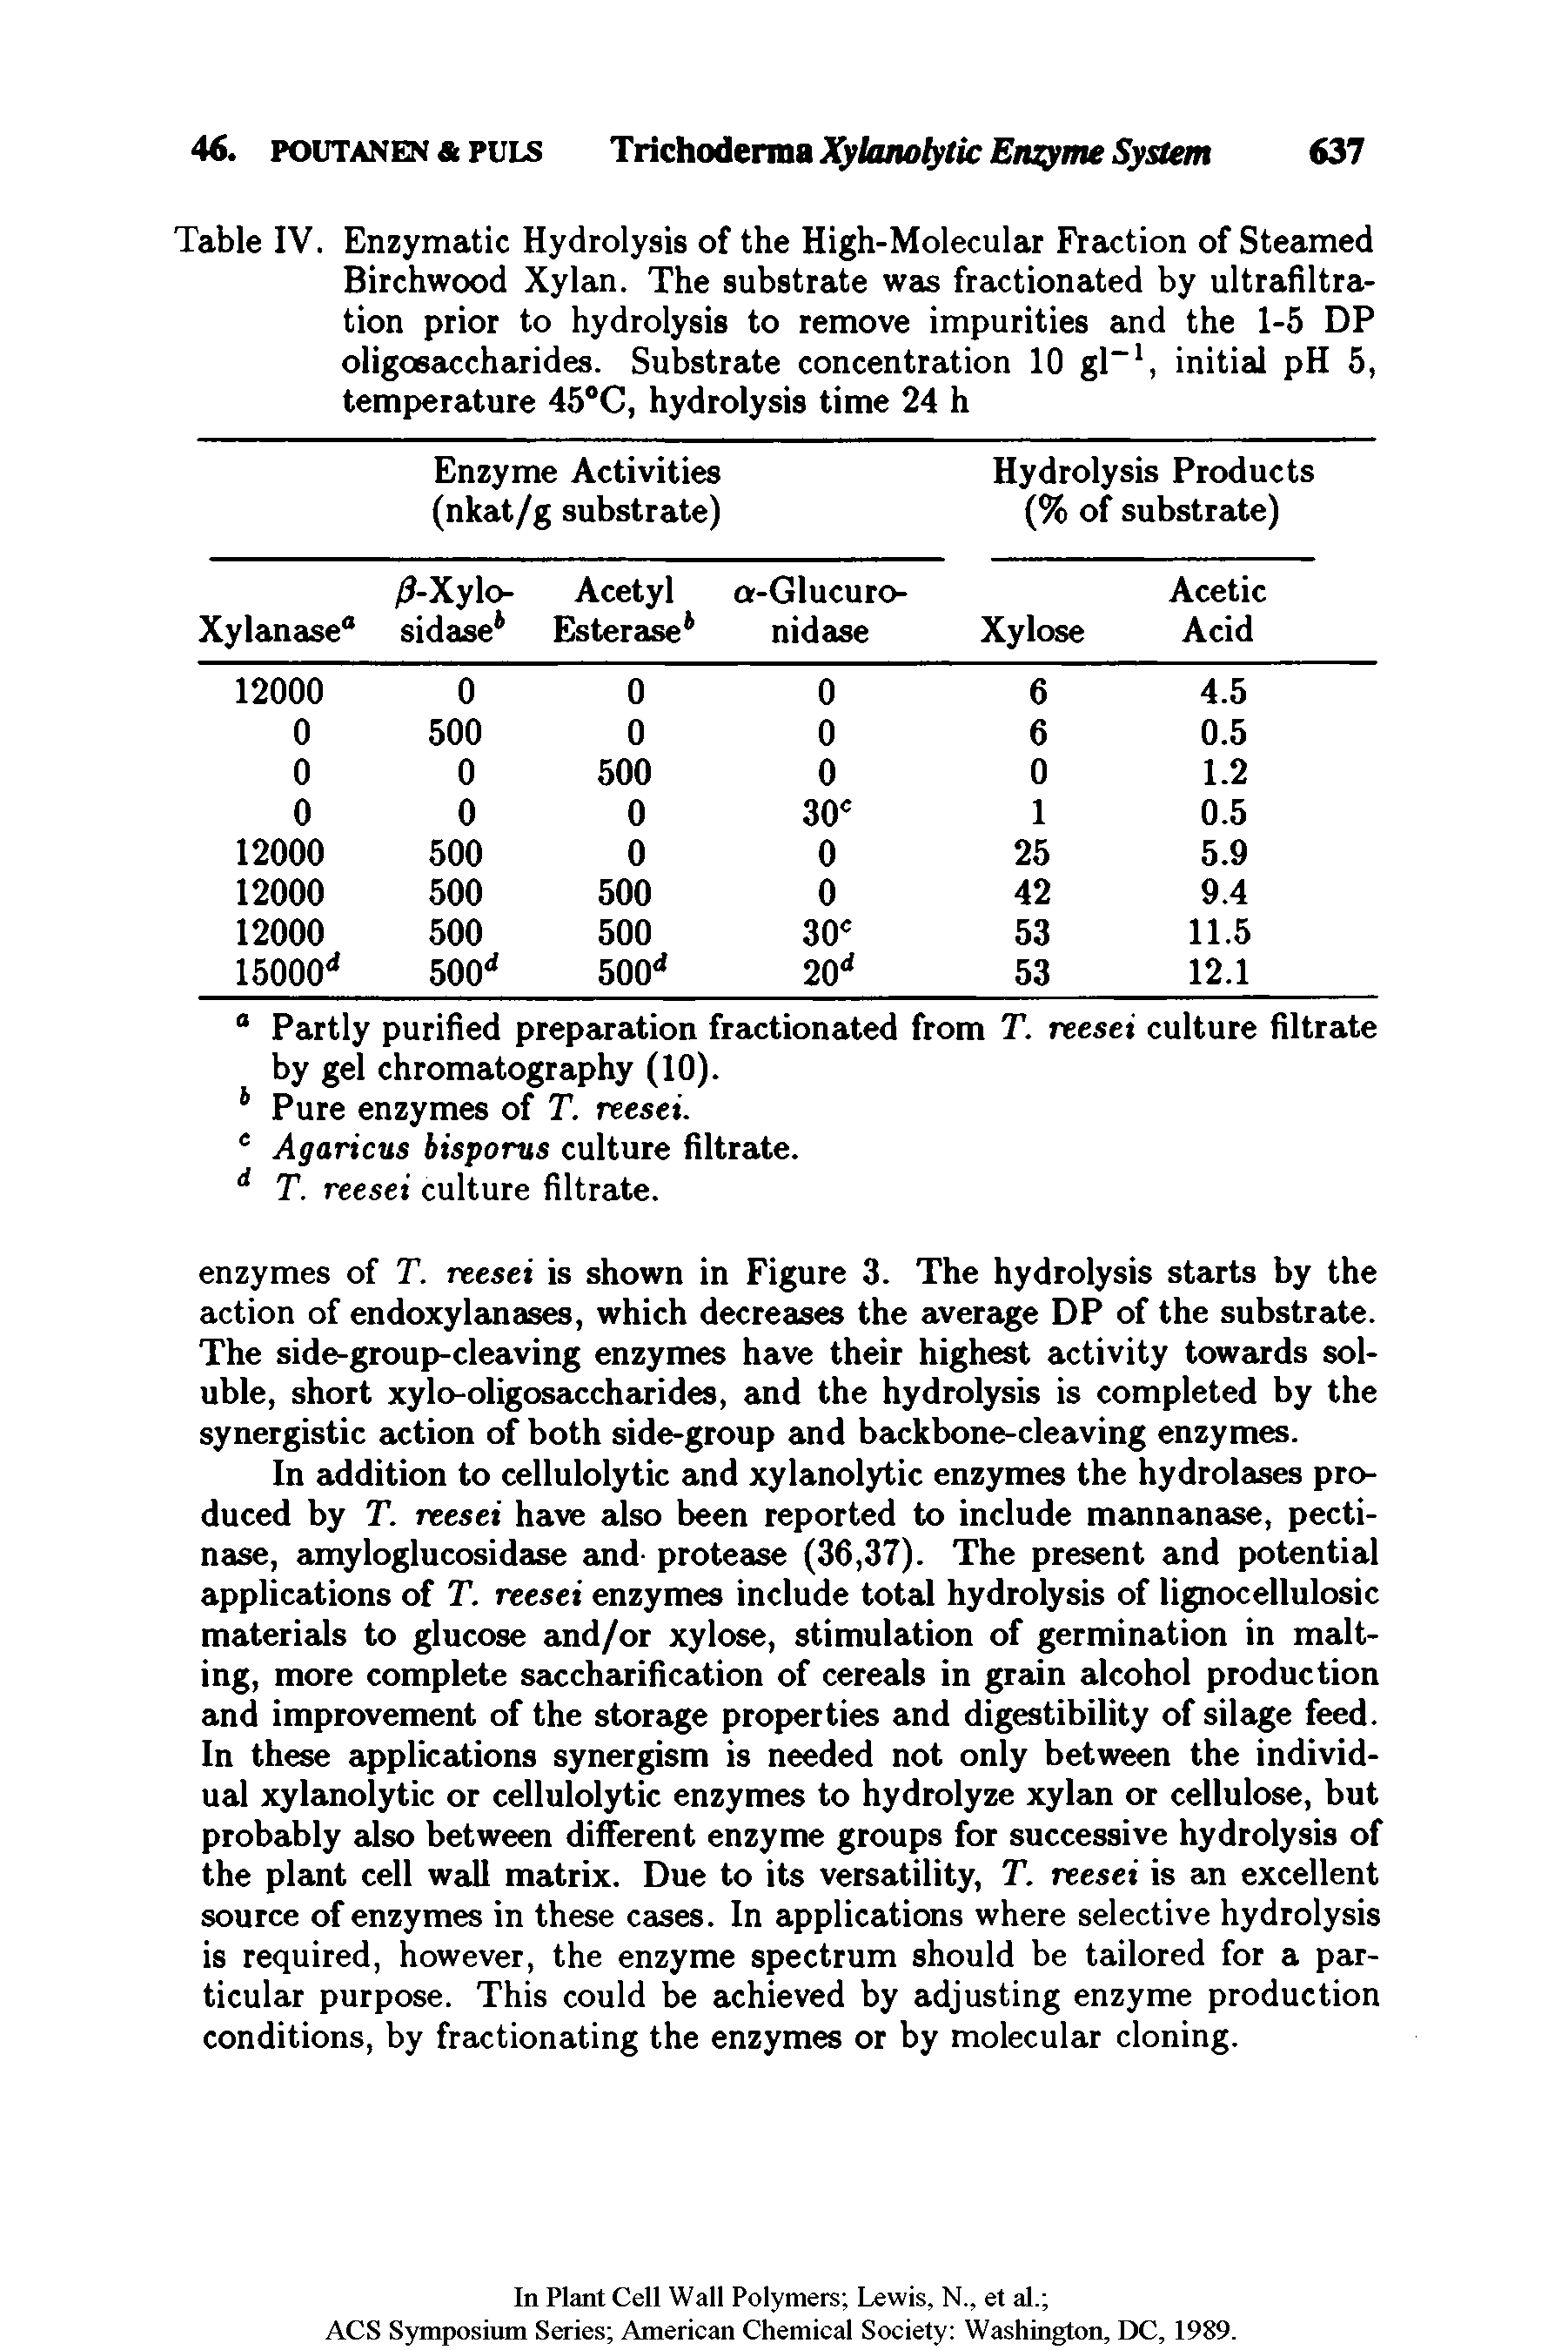 Table IV. Enzymatic Hydrolysis of the High-Molecular Fraction of Steamed Birchwood Xylan. The substrate was fractionated by ultrafiltration prior to hydrolysis to remove impurities and the 1-5 DP oligosaccharides. Substrate concentration 10 gl— 1, initial pH 5, temperature 45°C, hydrolysis time 24 h...